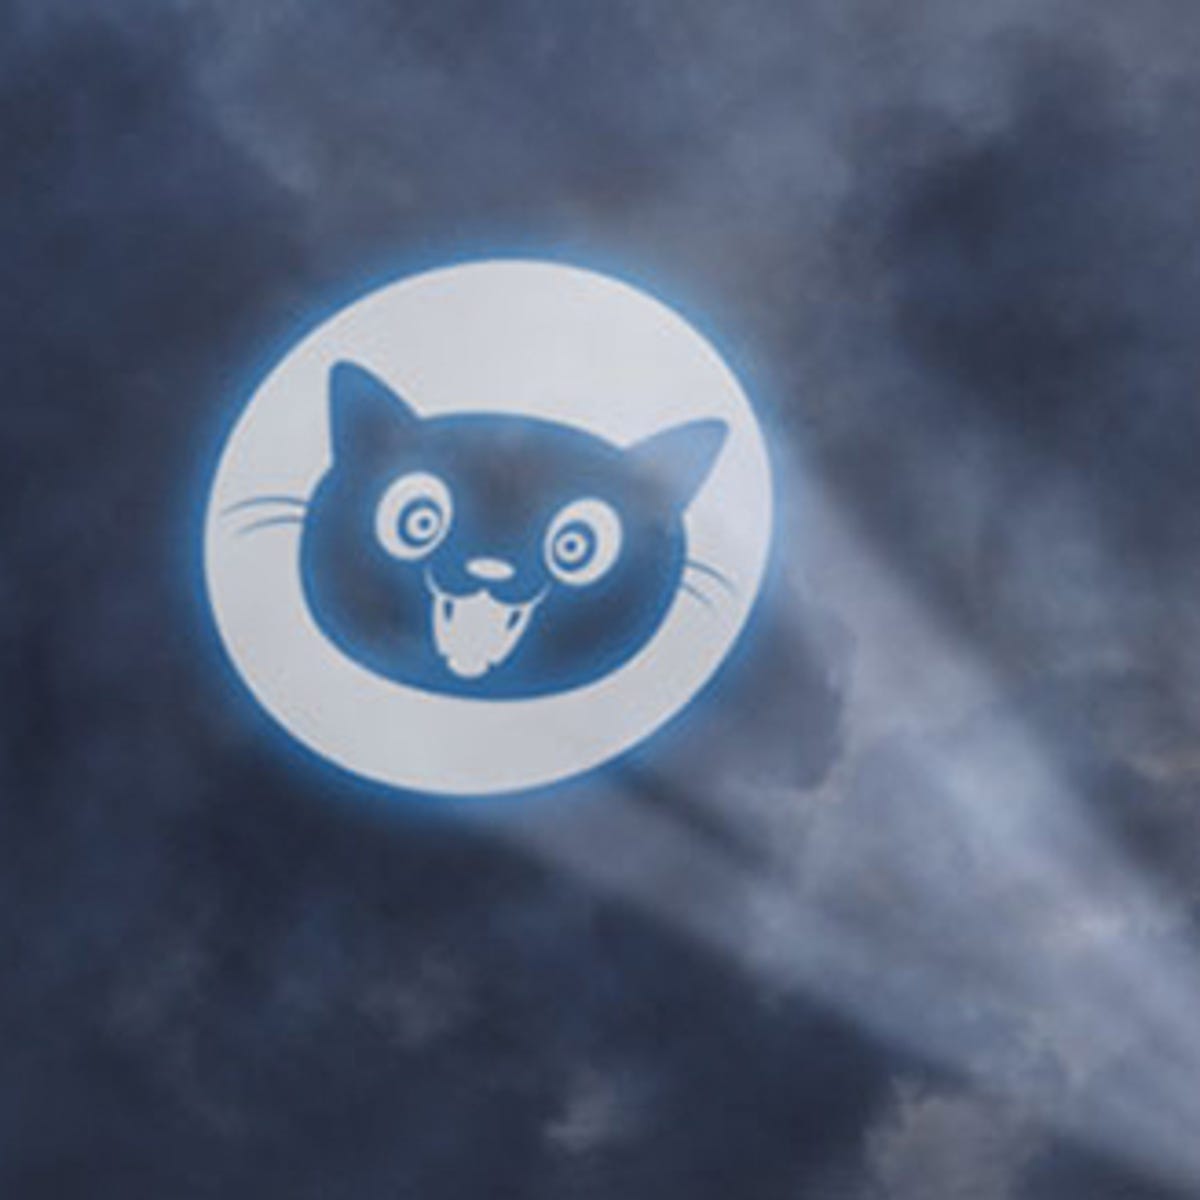 Look in the sky! It's a 'cat signal' for Net freedom - CNET